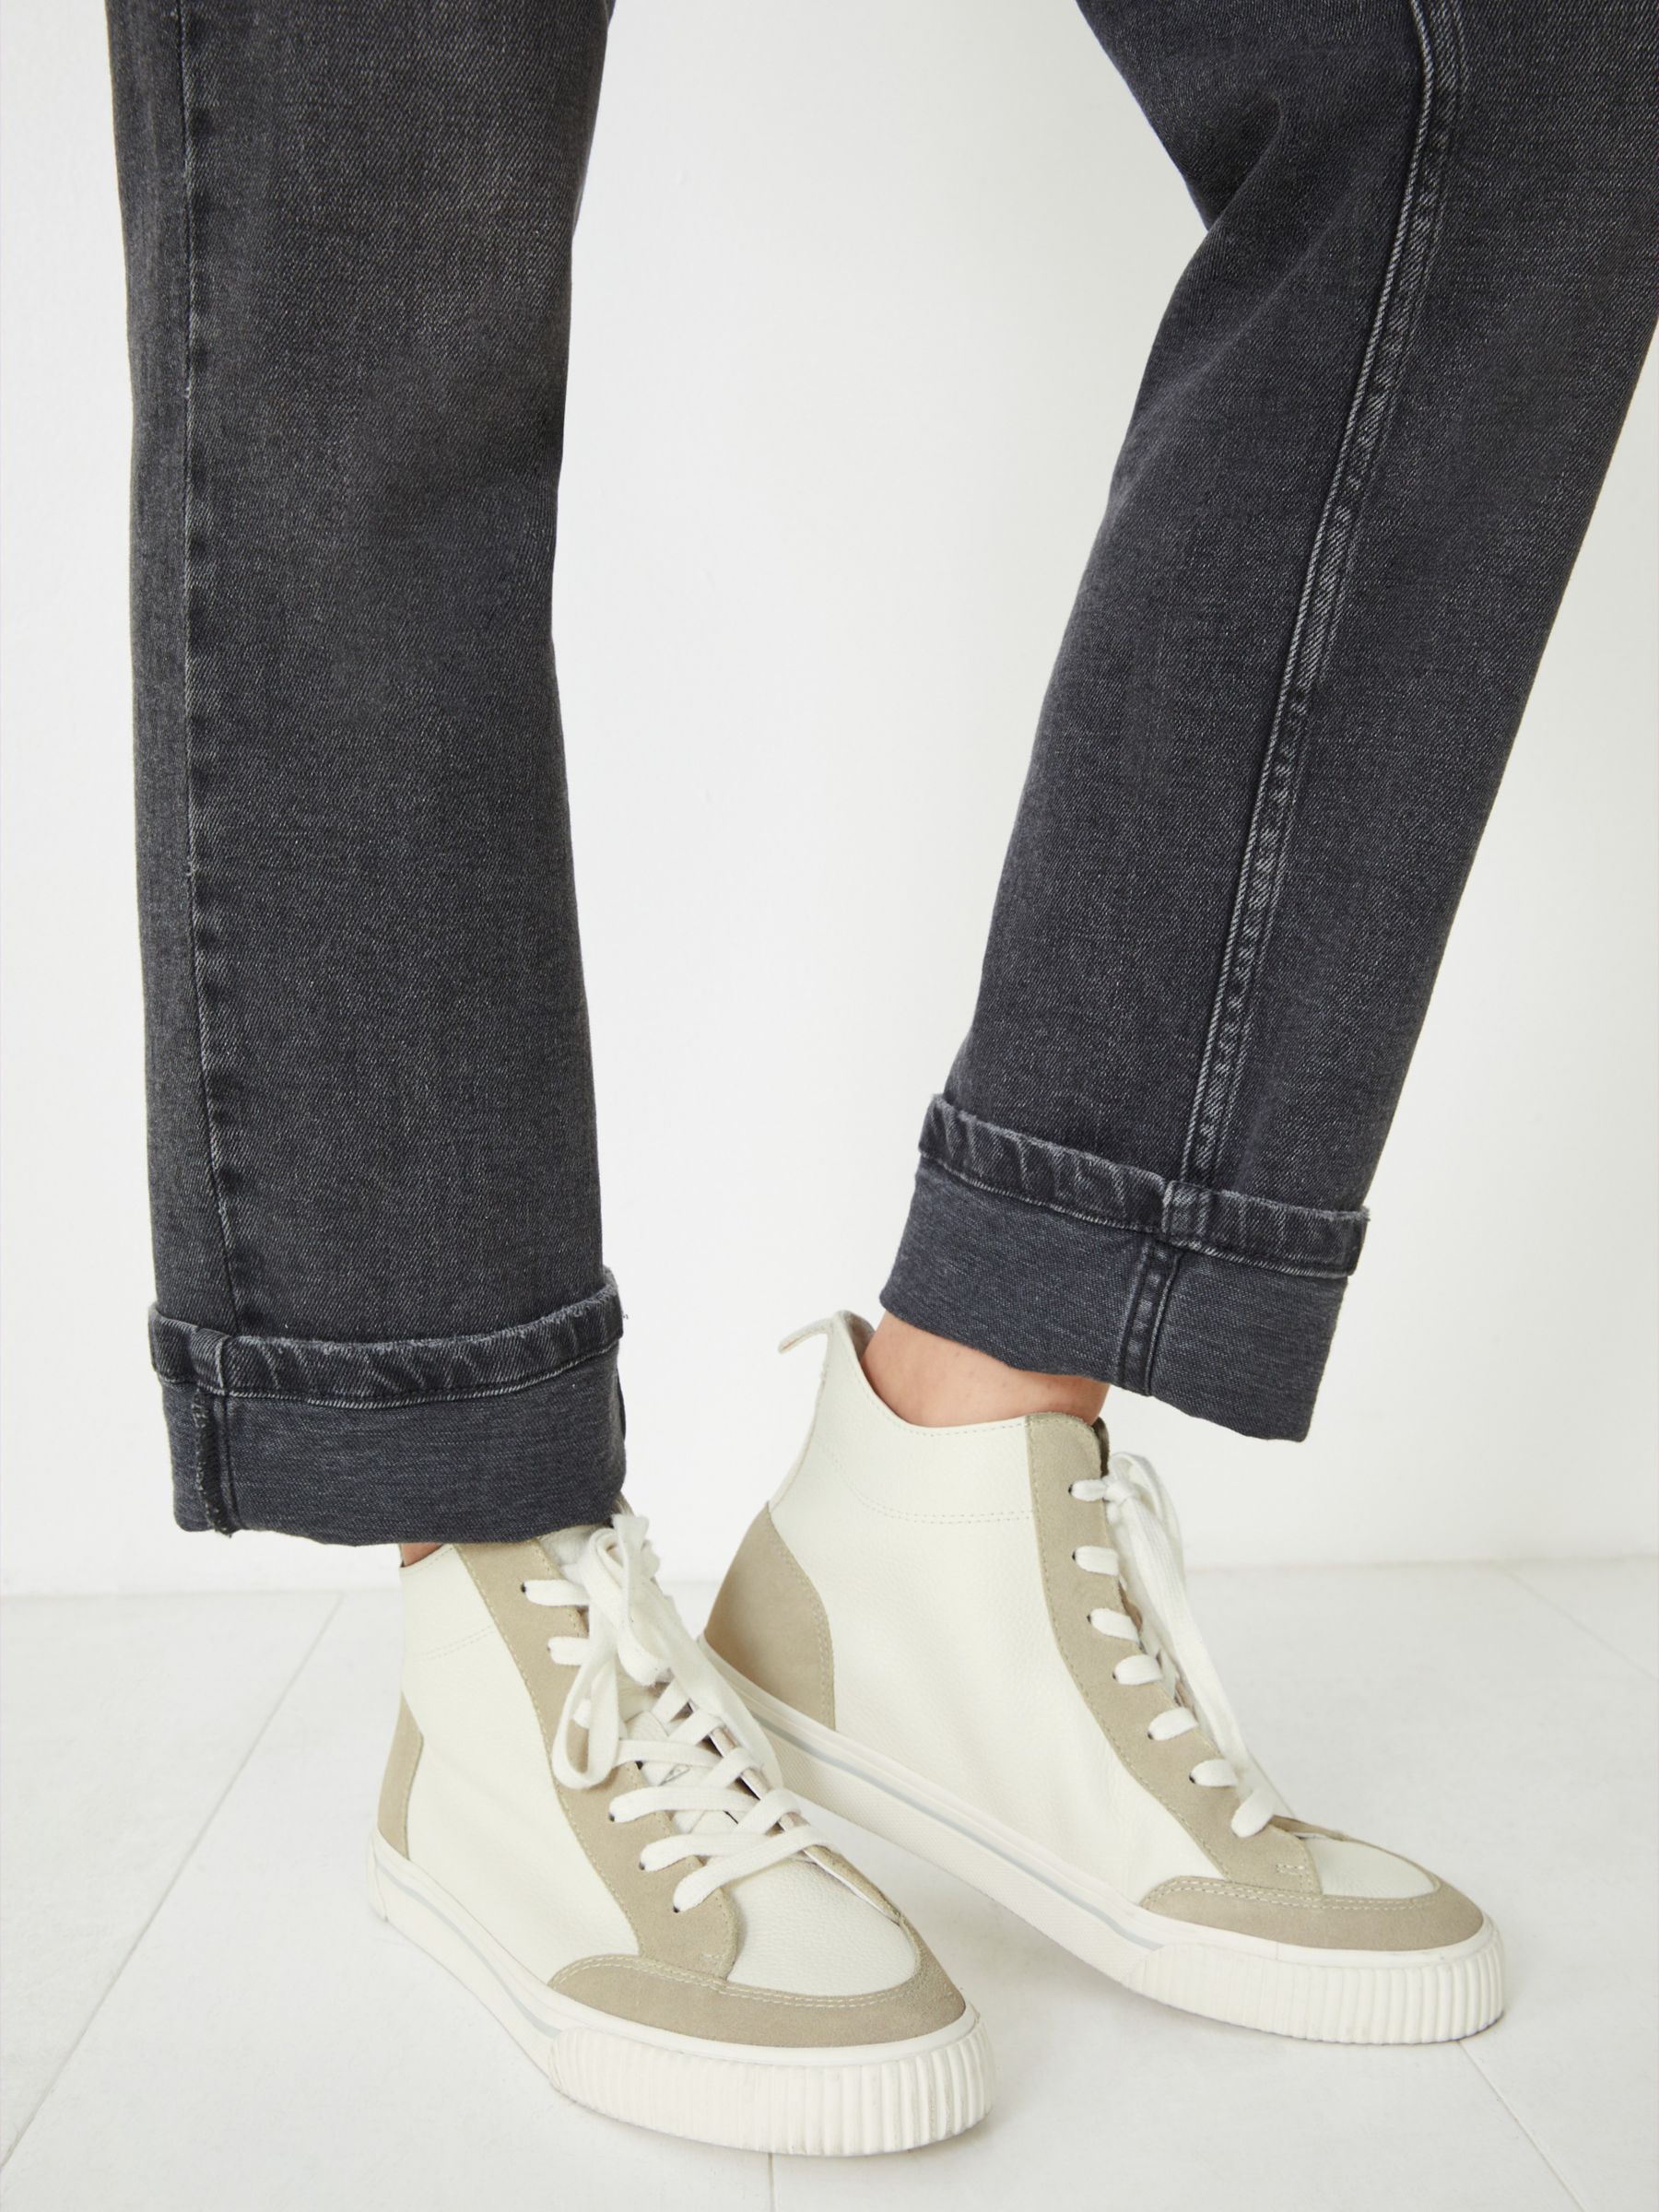 HUSH Auden Leather Hi Top Trainers, White at John Lewis & Partners